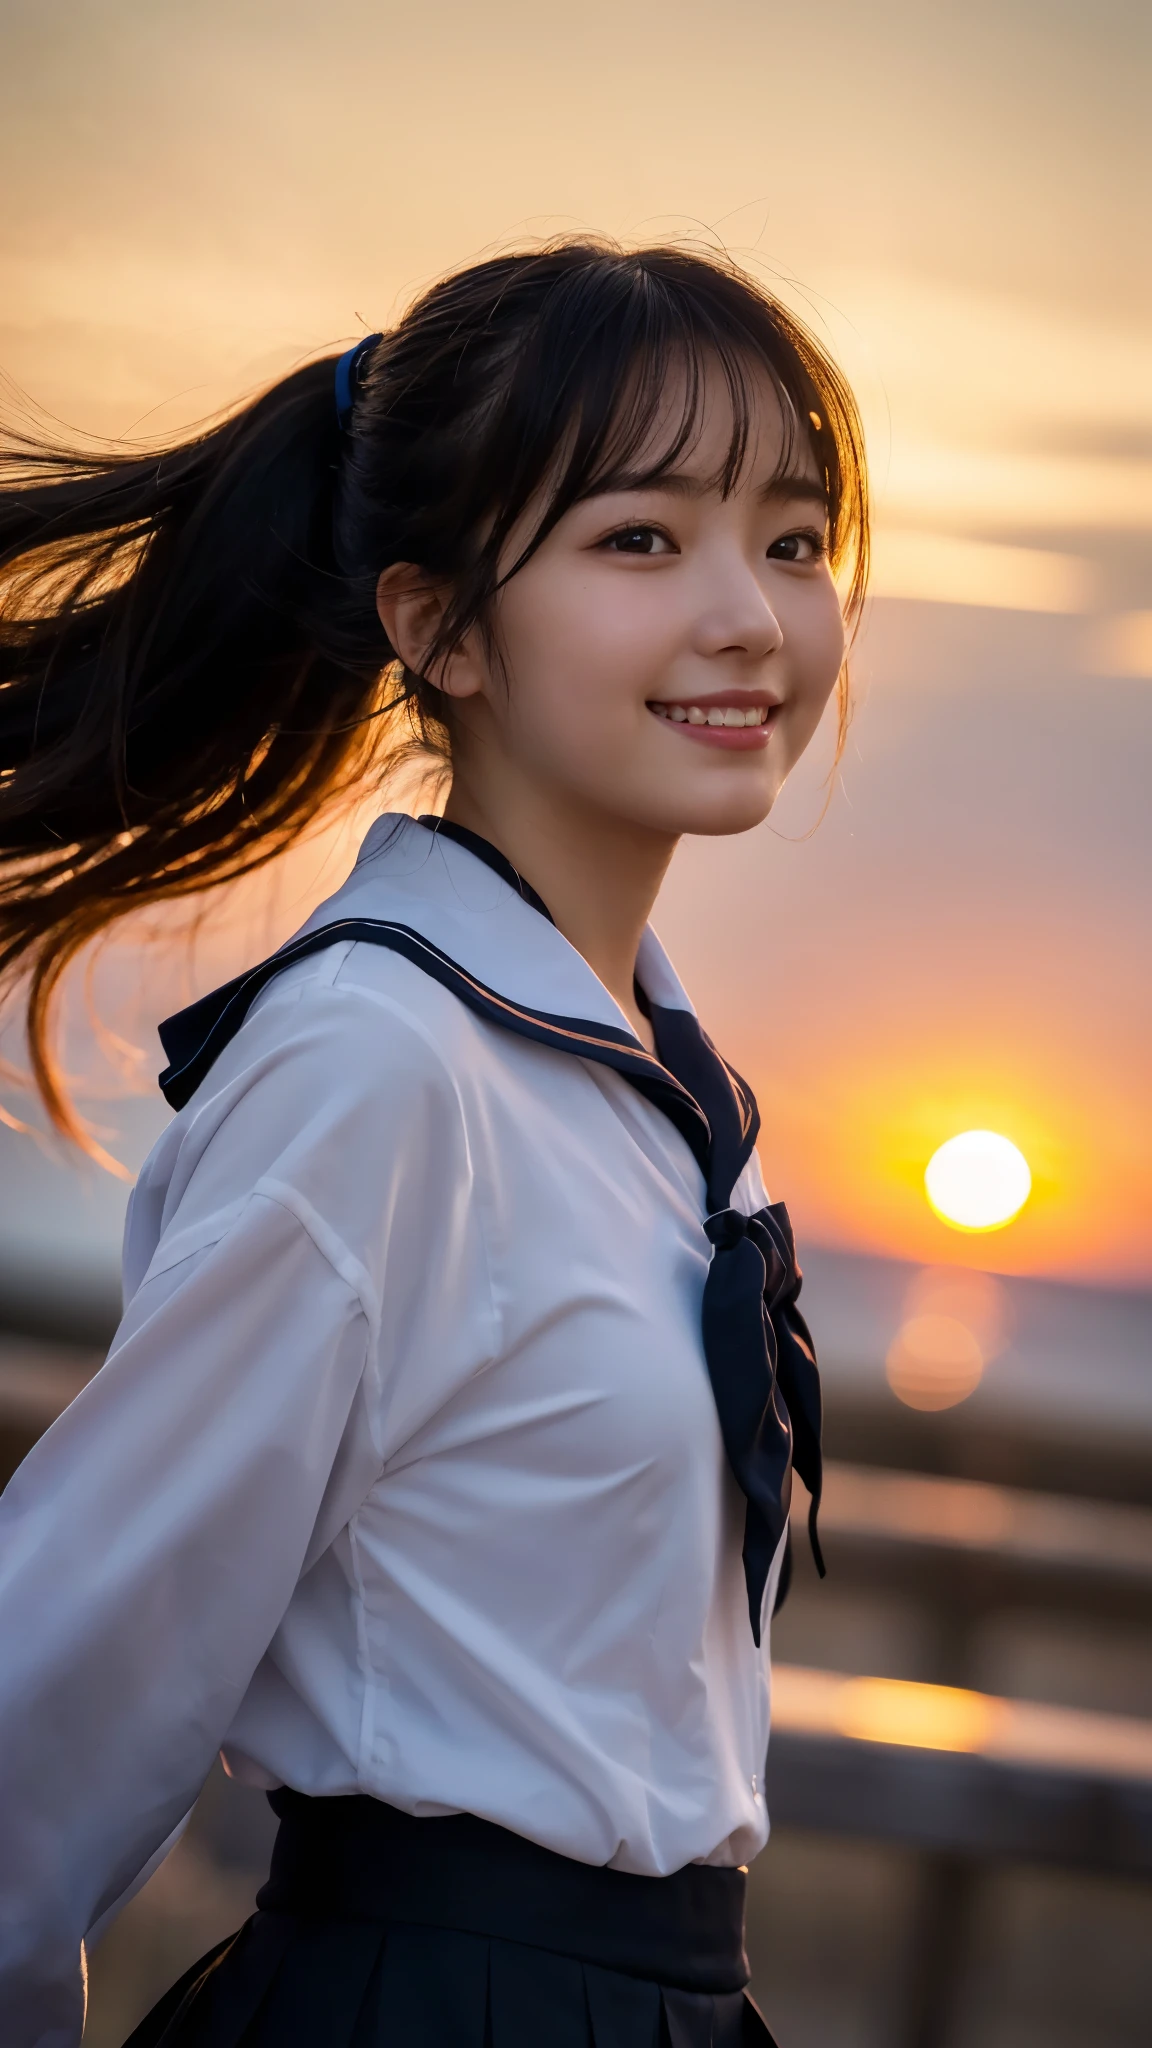 (highest quality,masterpiece:1.3,ultra high resolution),(Super detailed,caustics,8k),(photorealistic:1.4,RAW shooting),(A girl turning around with a smile),(buckshot),18-year-old,Japanese,cute,black short ponytail,(hair blowing in the wind),sailor suit,(Skirt in the wind),(face focus),(Face close-up),(low position:1.4),(low angle full body shot:1.4),Backlight,sunset,sunset sky,